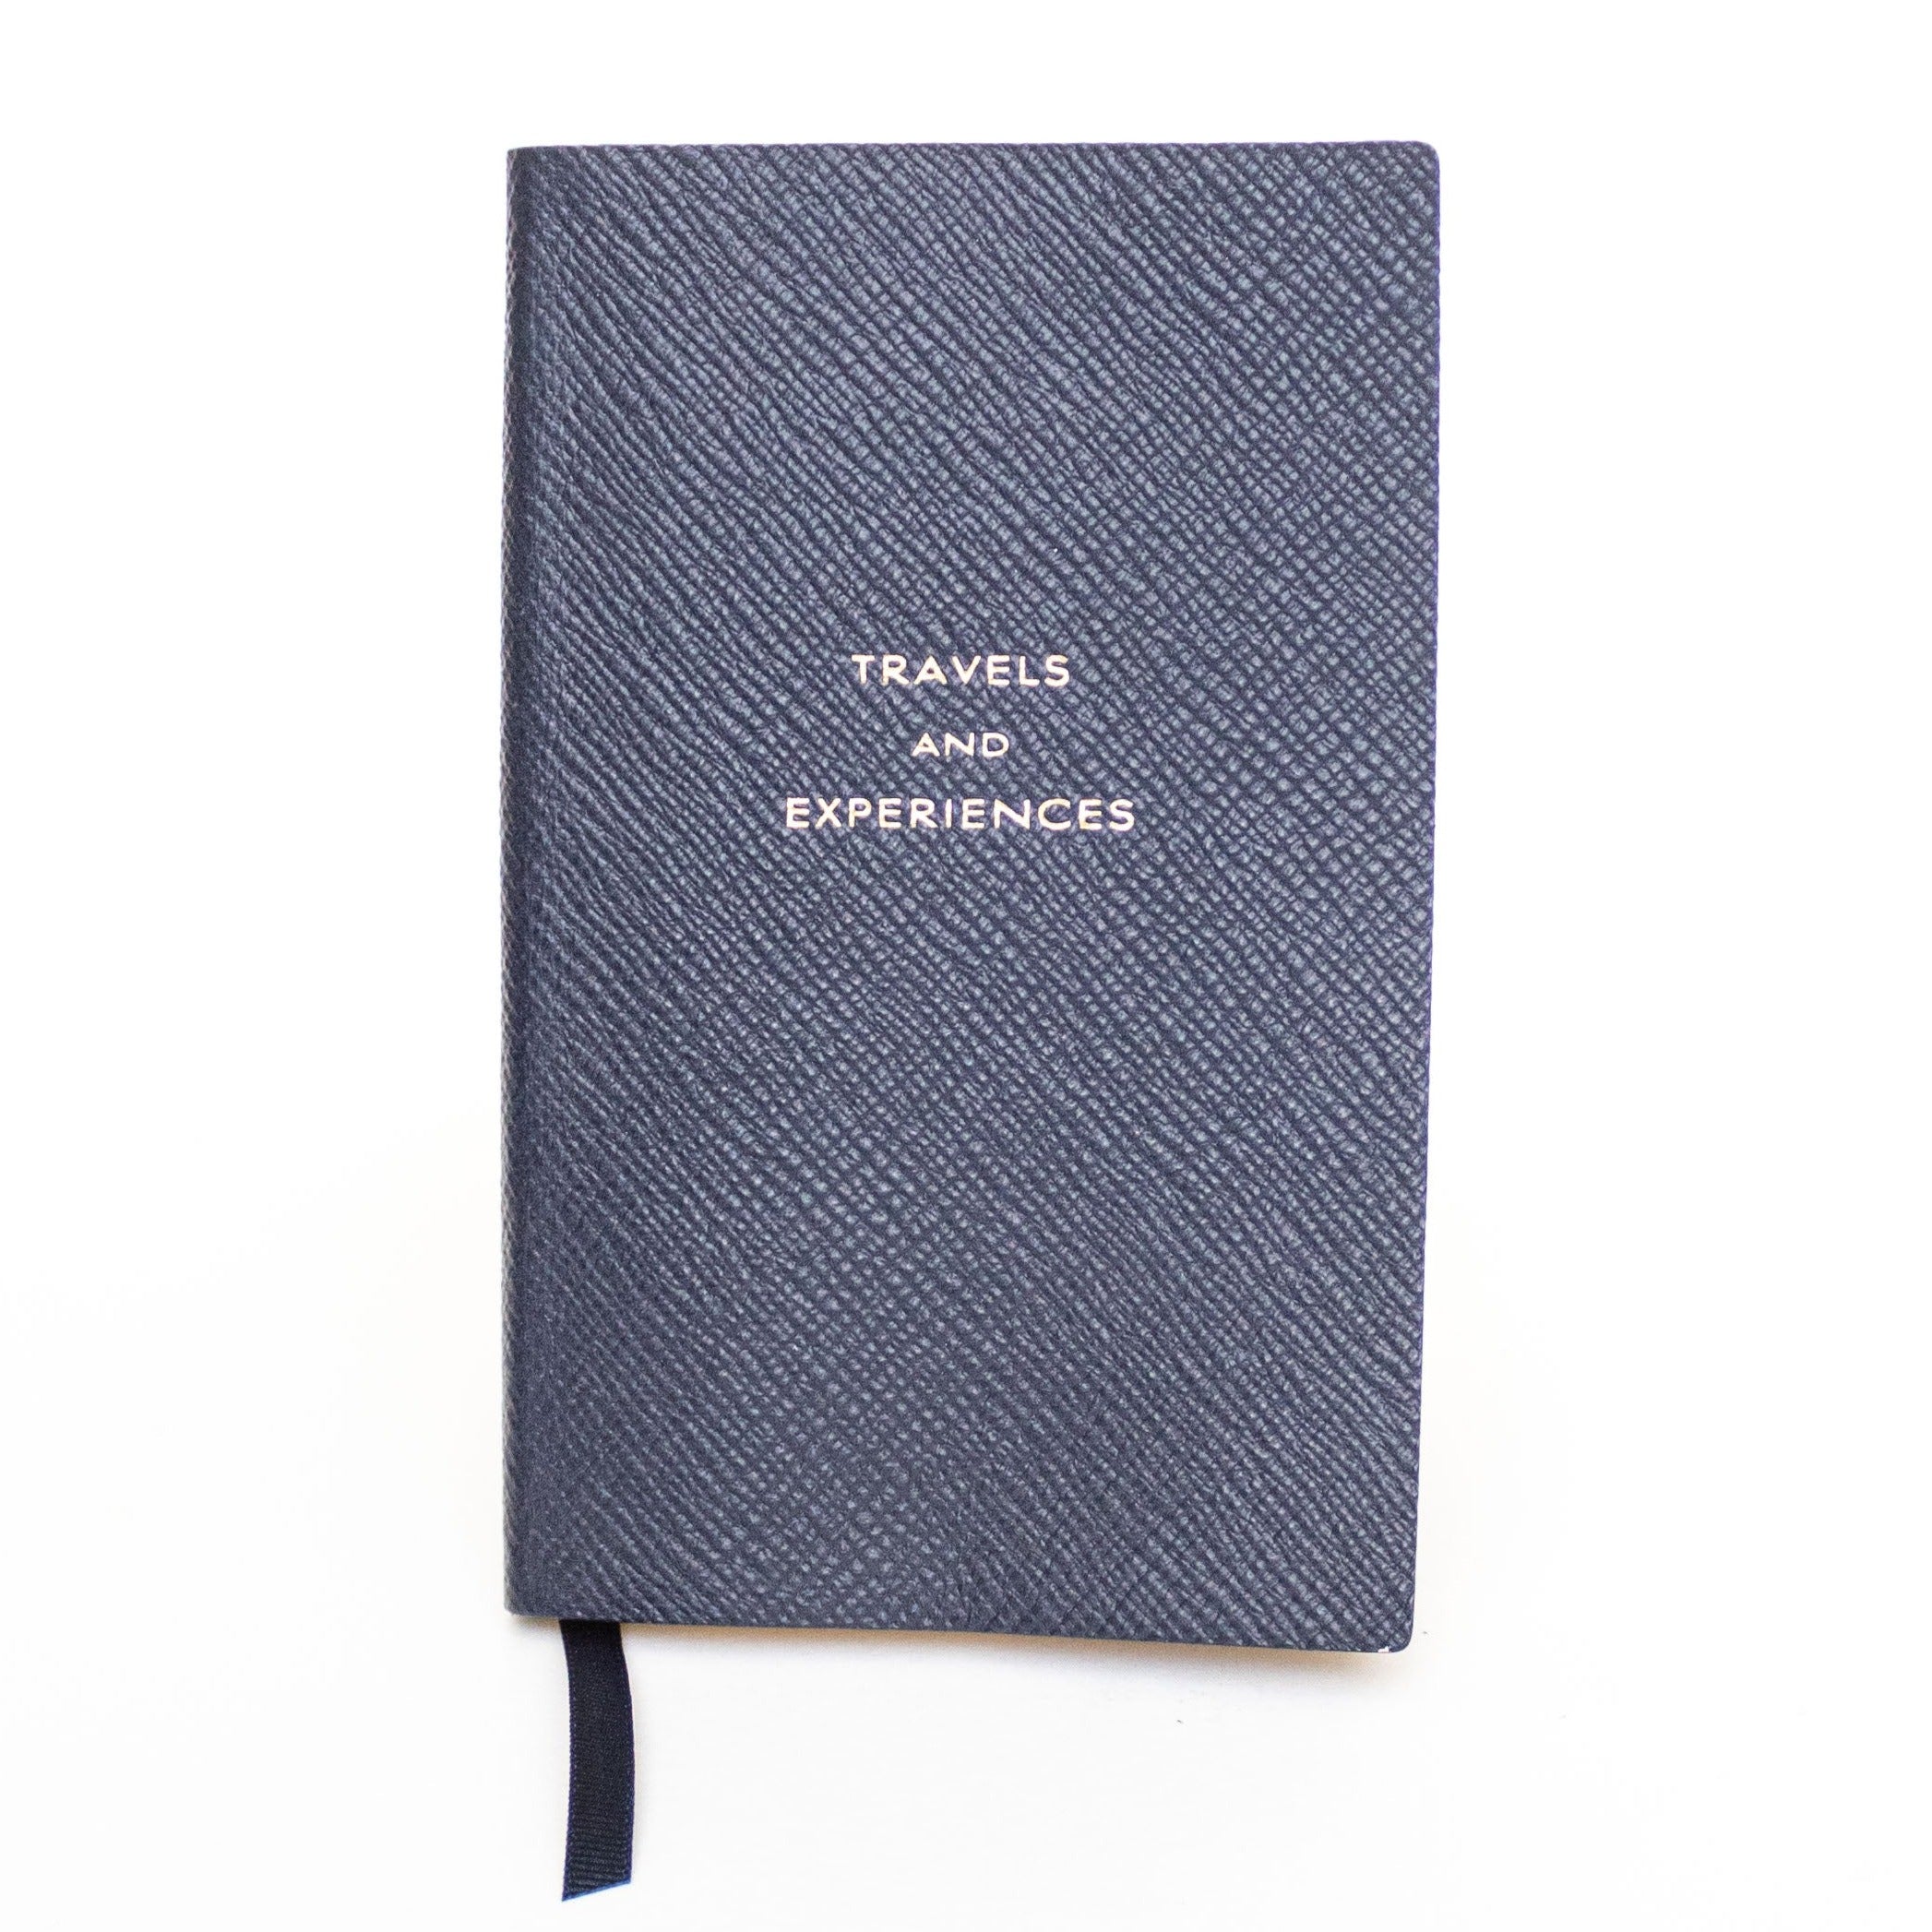 Smythson Travel and Experiences Notebook Navy - Decree Co. 